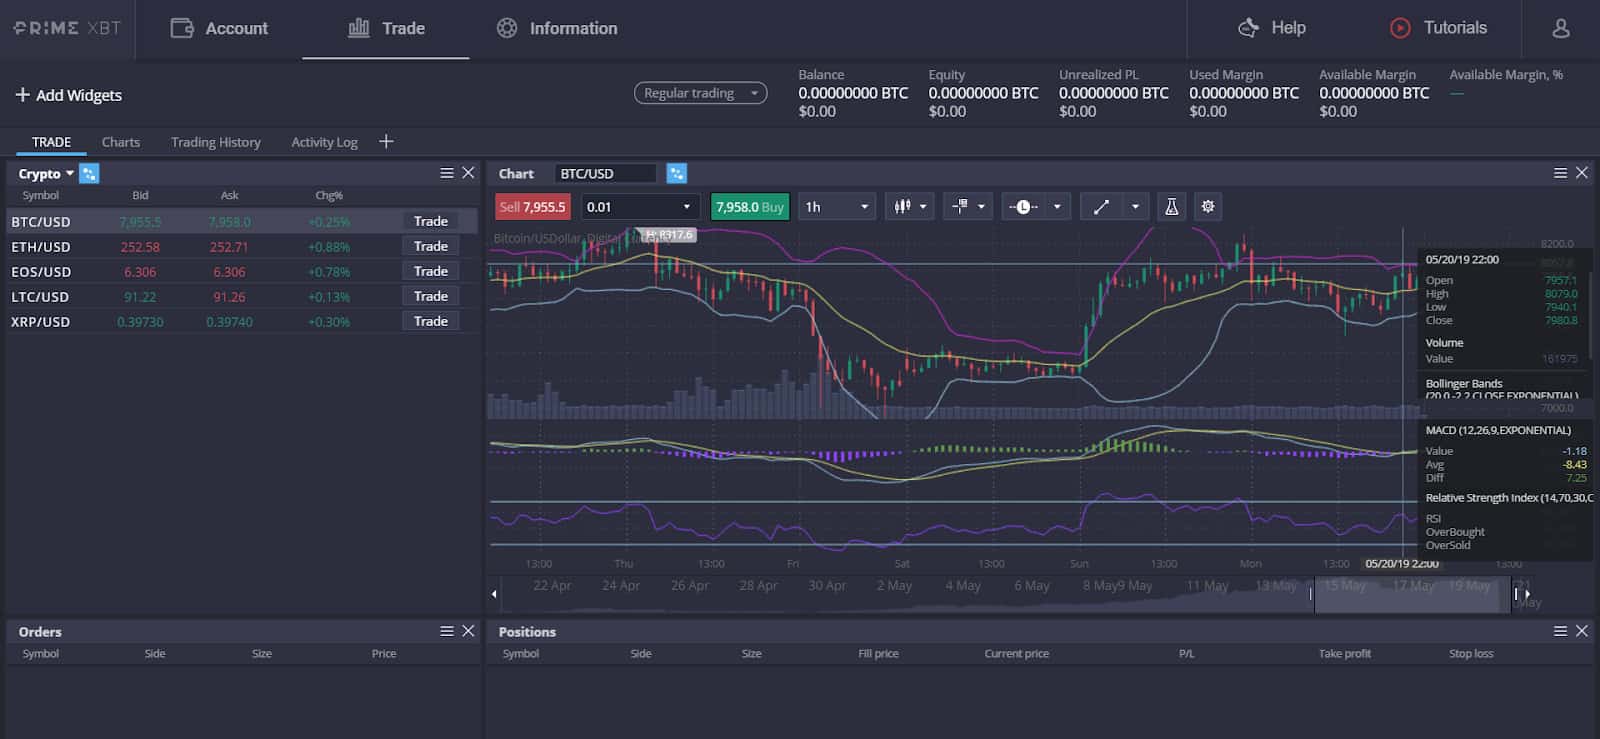 A highly customizable interface makes trading on PrimeXBT personal